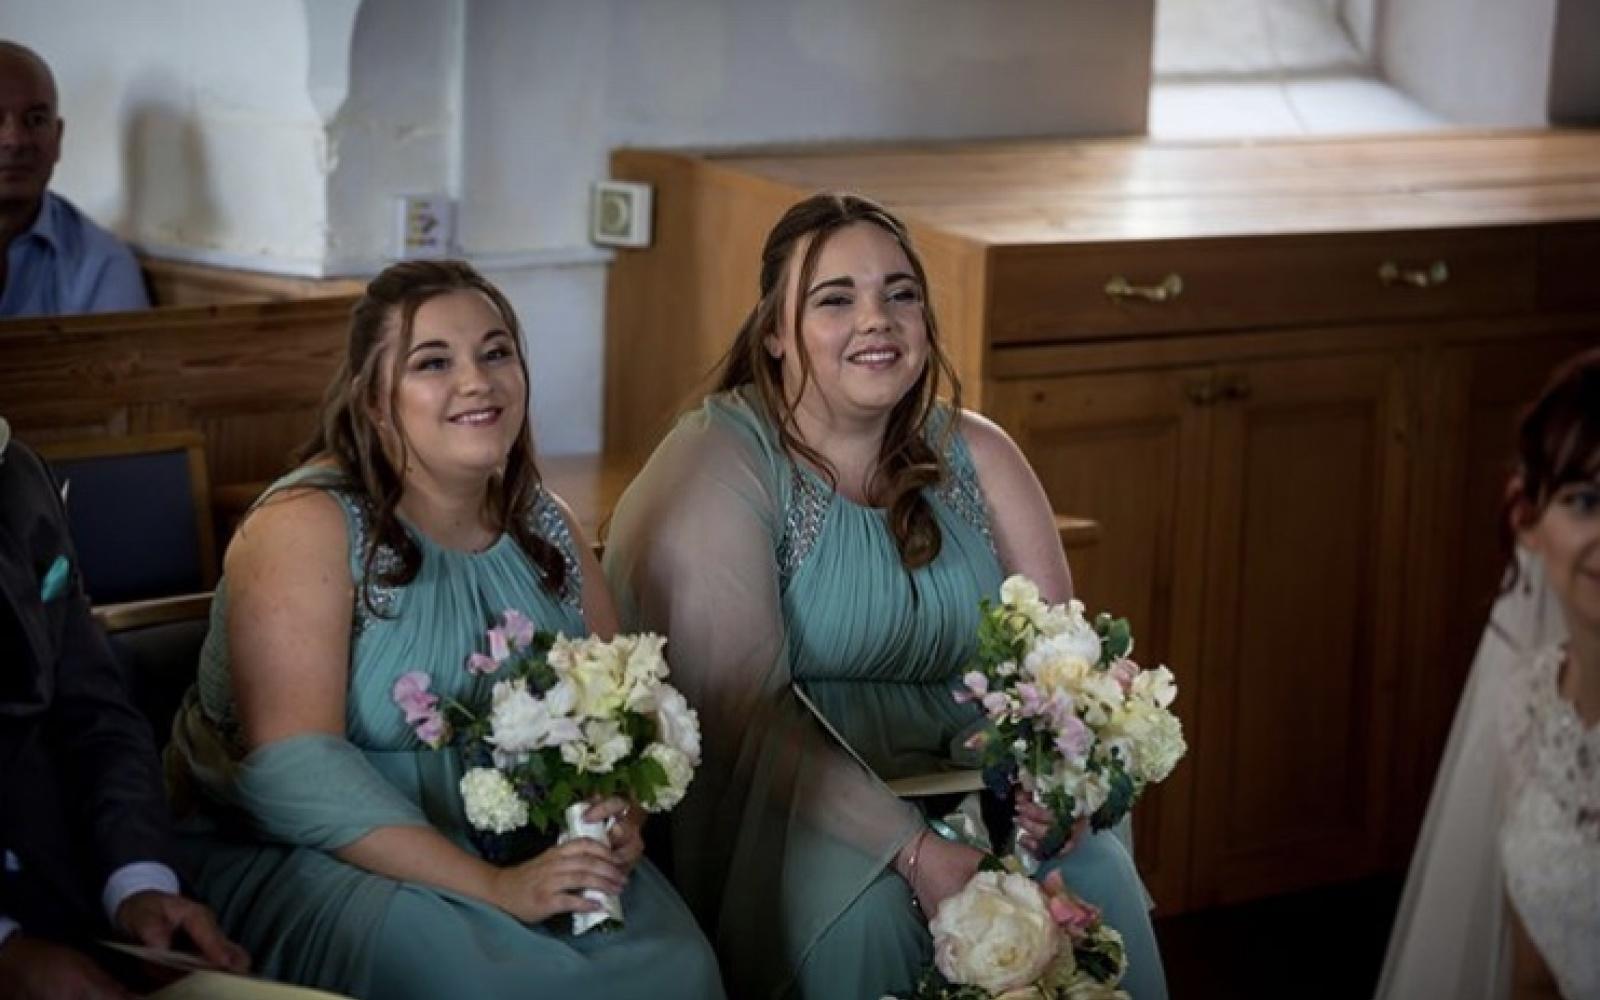 Real Wedding Georgia Powell Hair Makeup Artist Wedding Whitewed Directory Approved Bride Prince Hill House Worton Devizes Wiltshire Bridesmaids Church Service